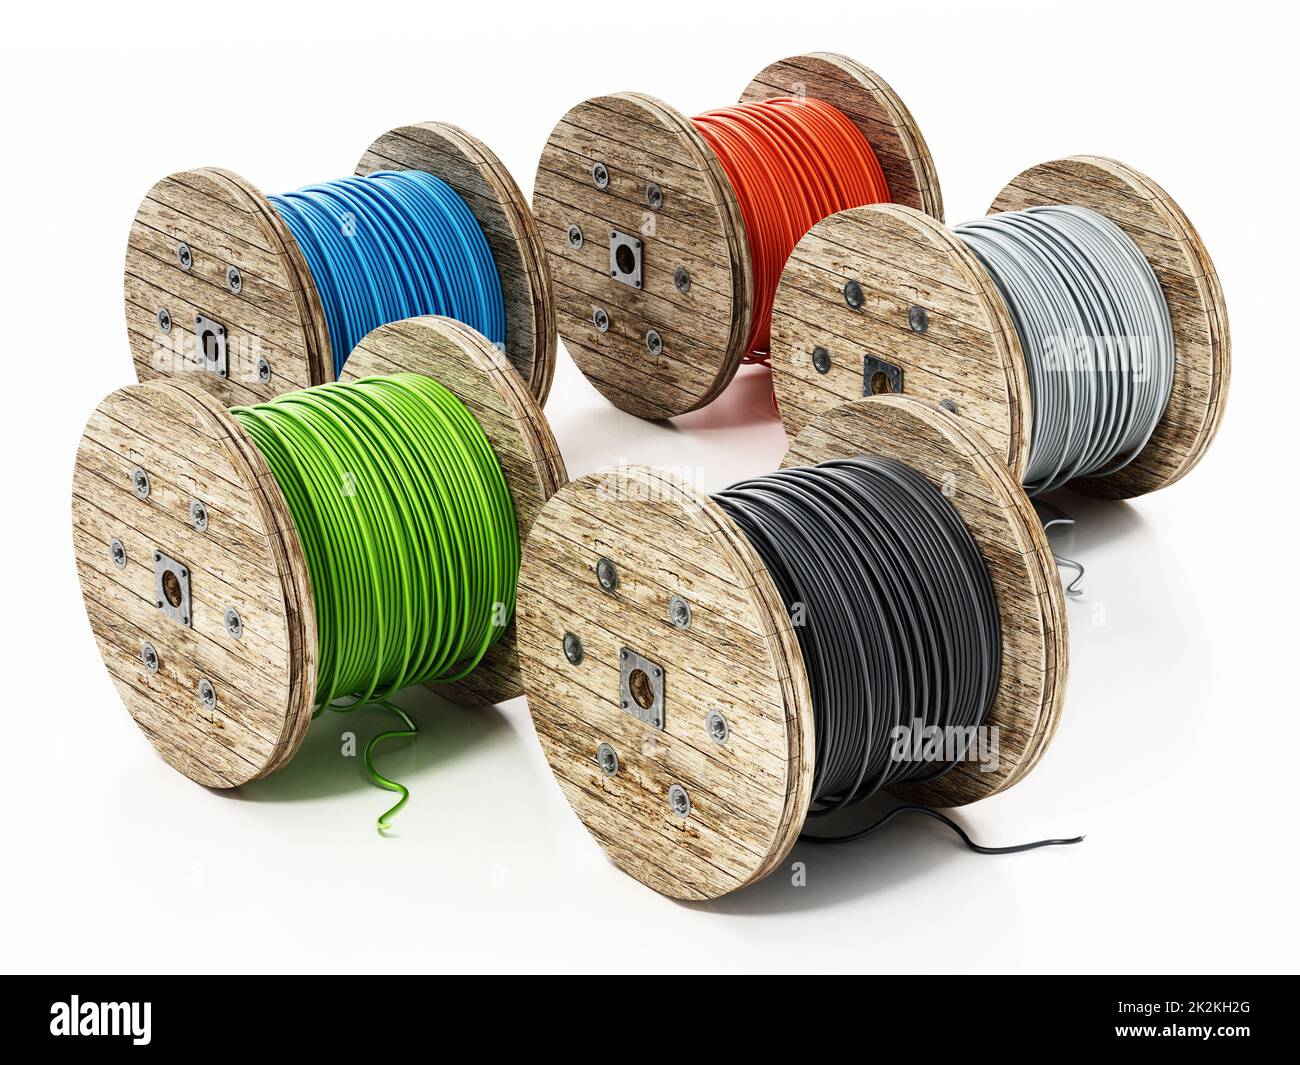 Copper wire reel - Stock Image - C013/2691 - Science Photo Library